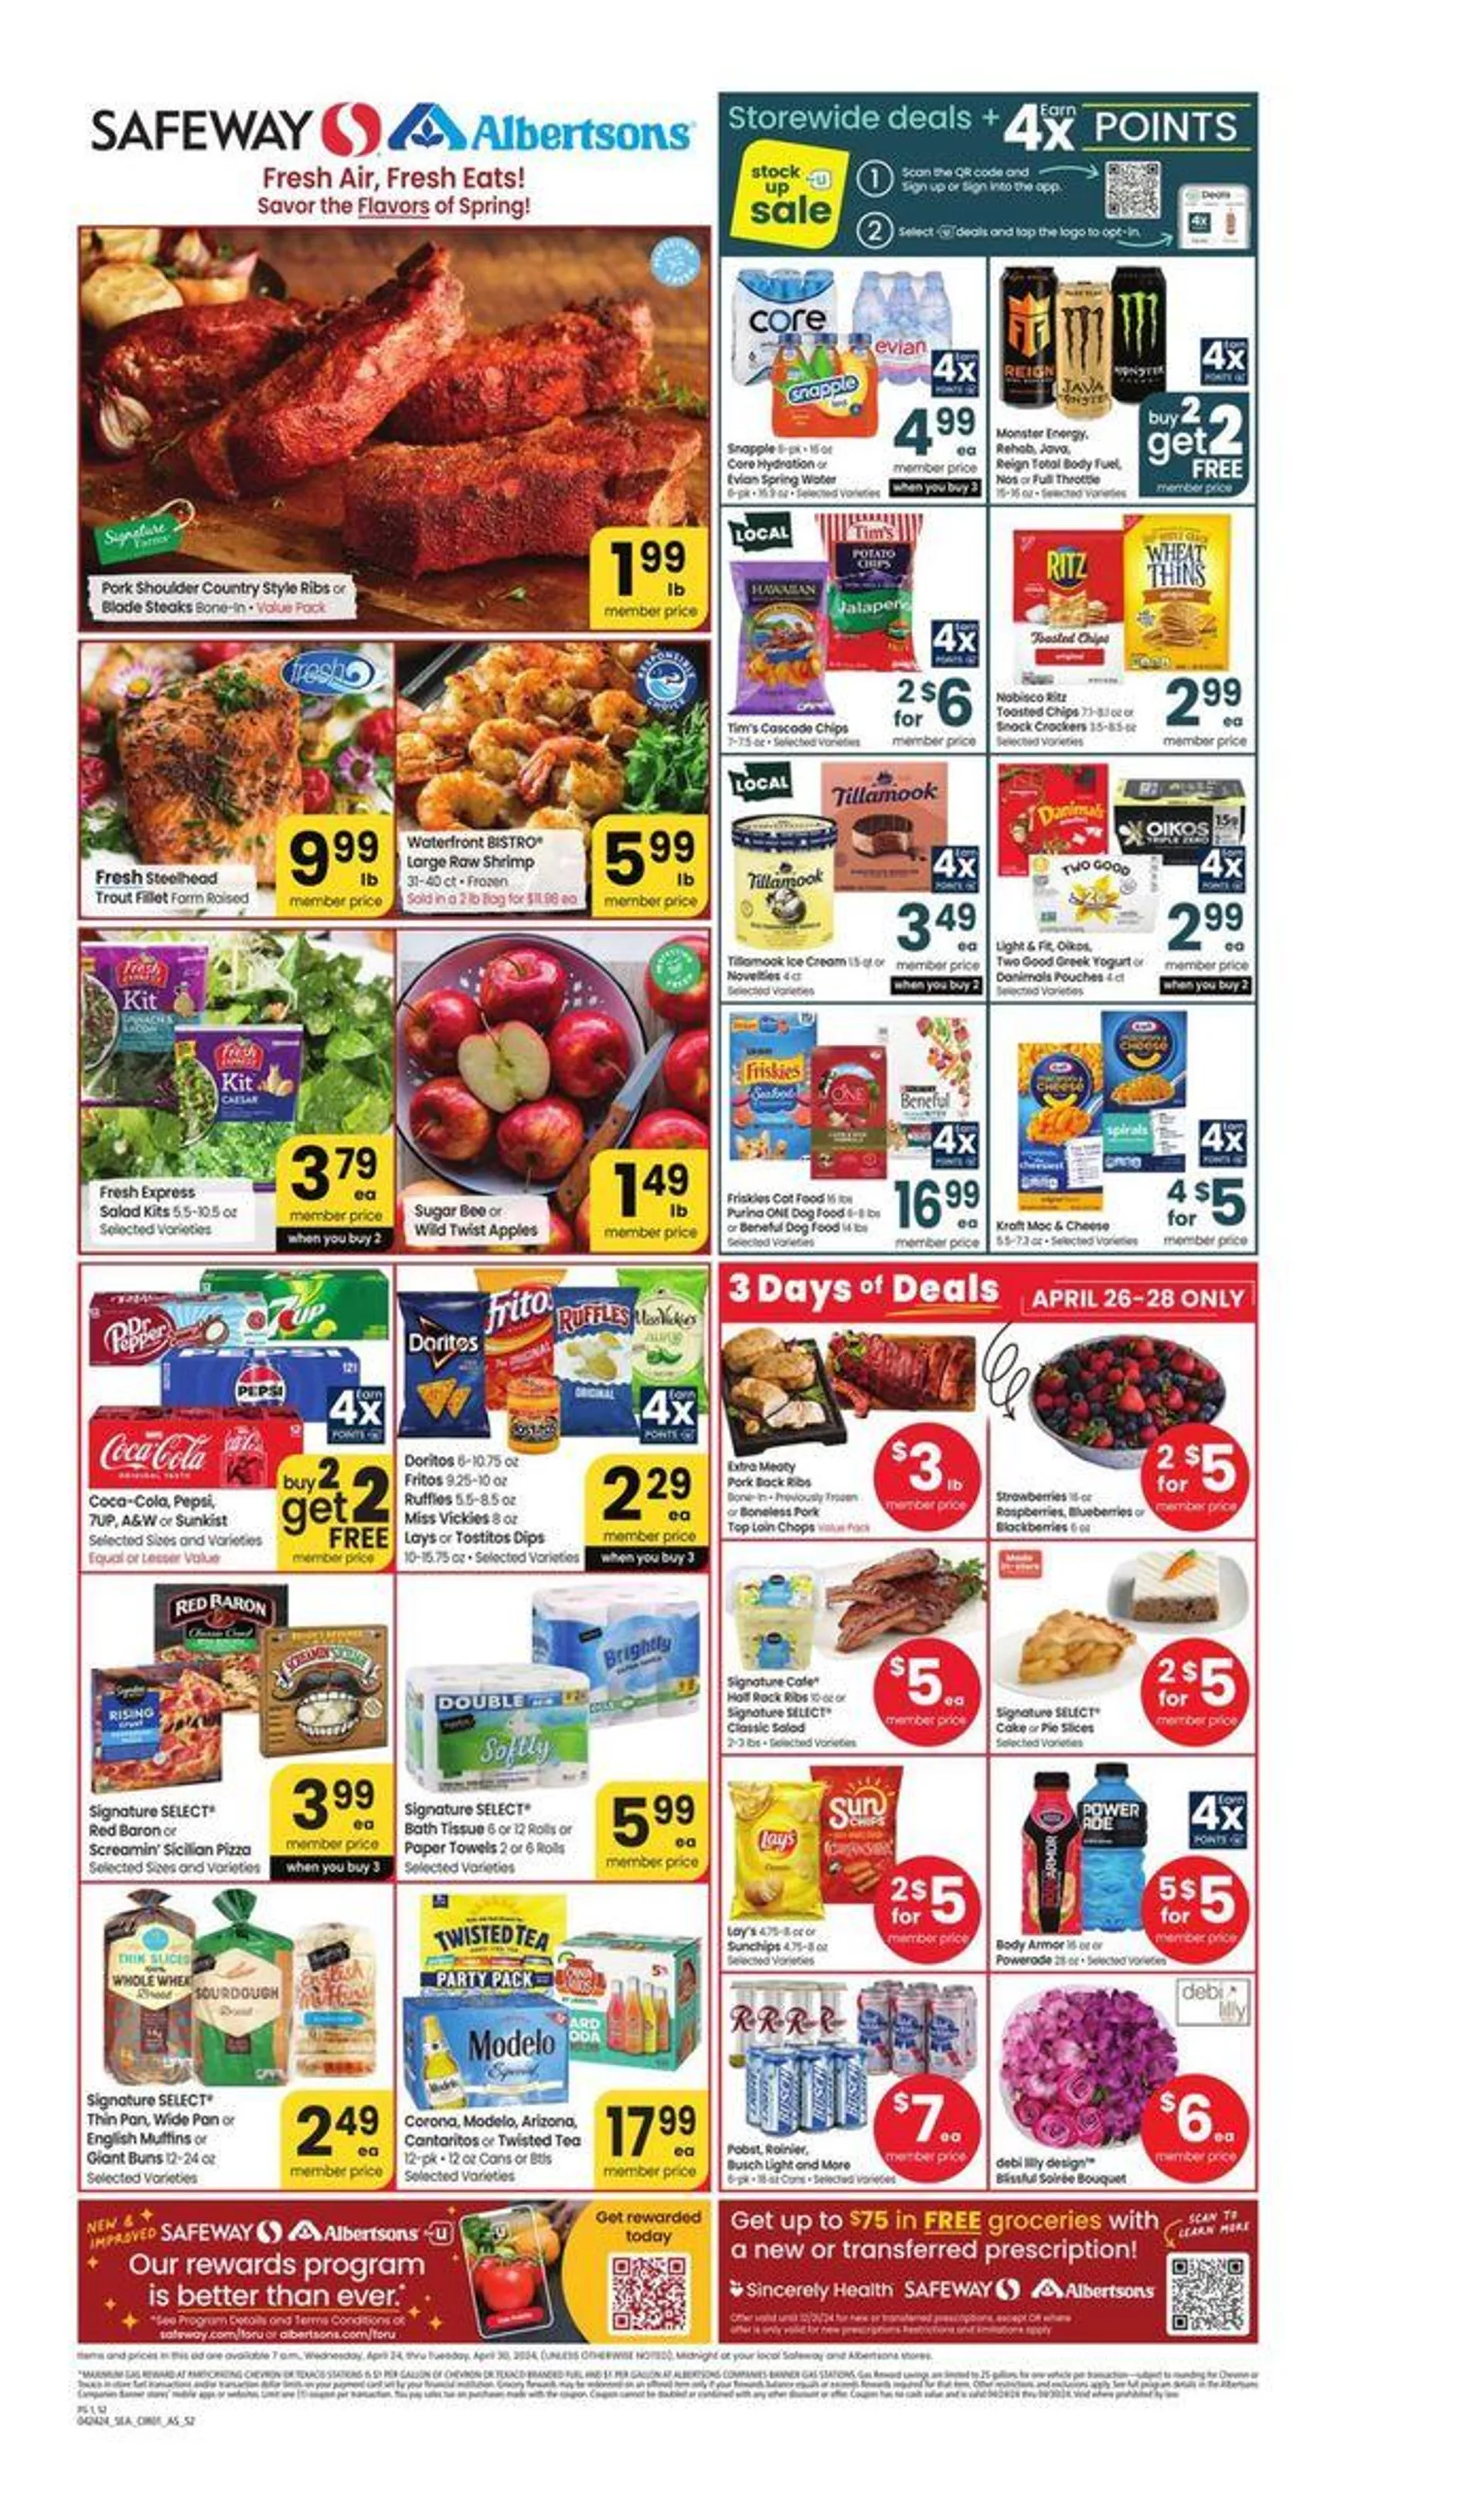 Weekly Ad - Albertsons - Seattle - 1